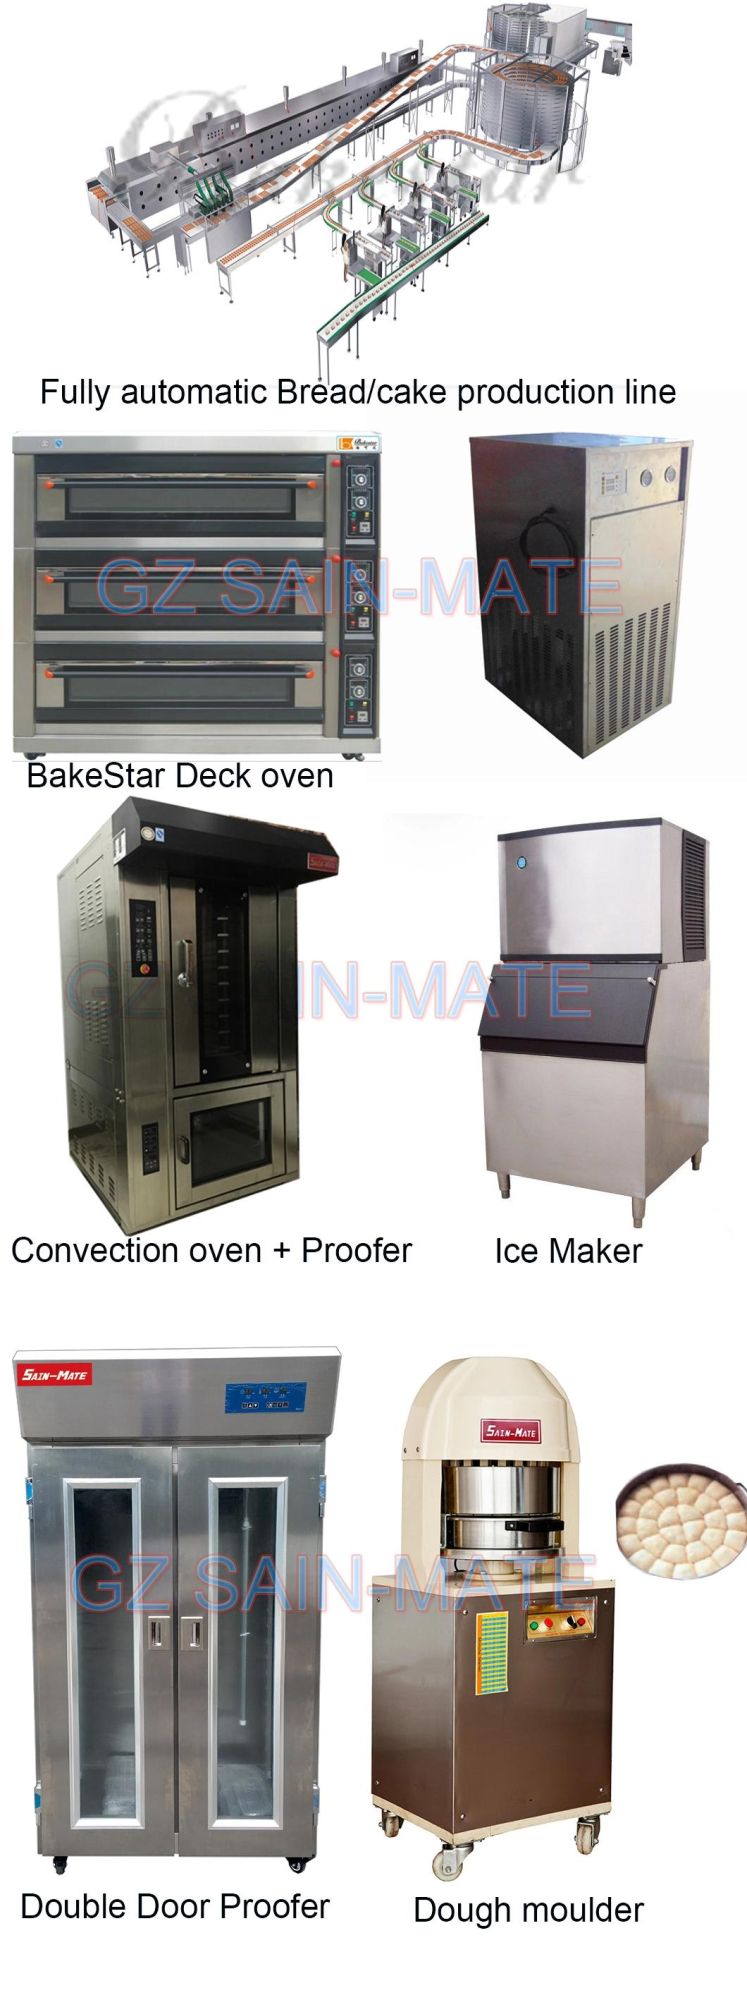 Commercial Electric Bakery Rotary Oven for Turkish Bread, Hot Air 32 Trays Rotary Oven From Turkey